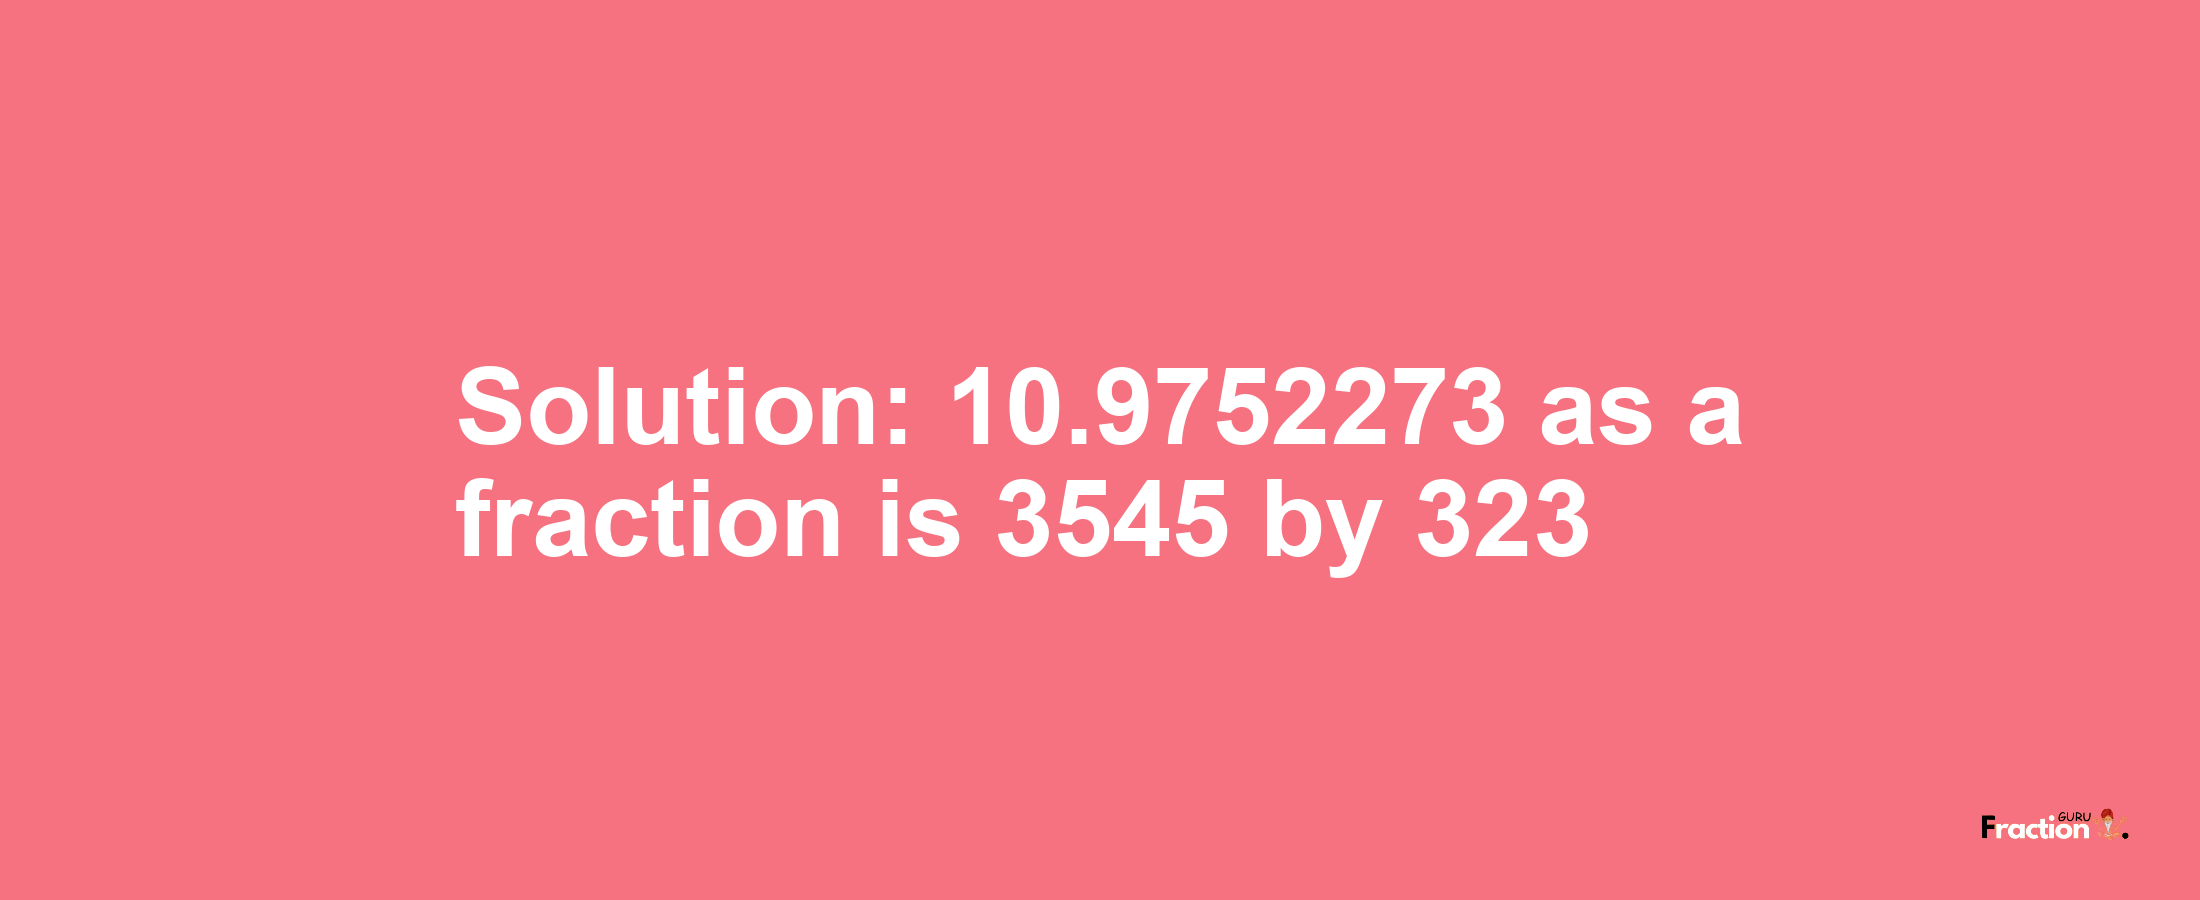 Solution:10.9752273 as a fraction is 3545/323